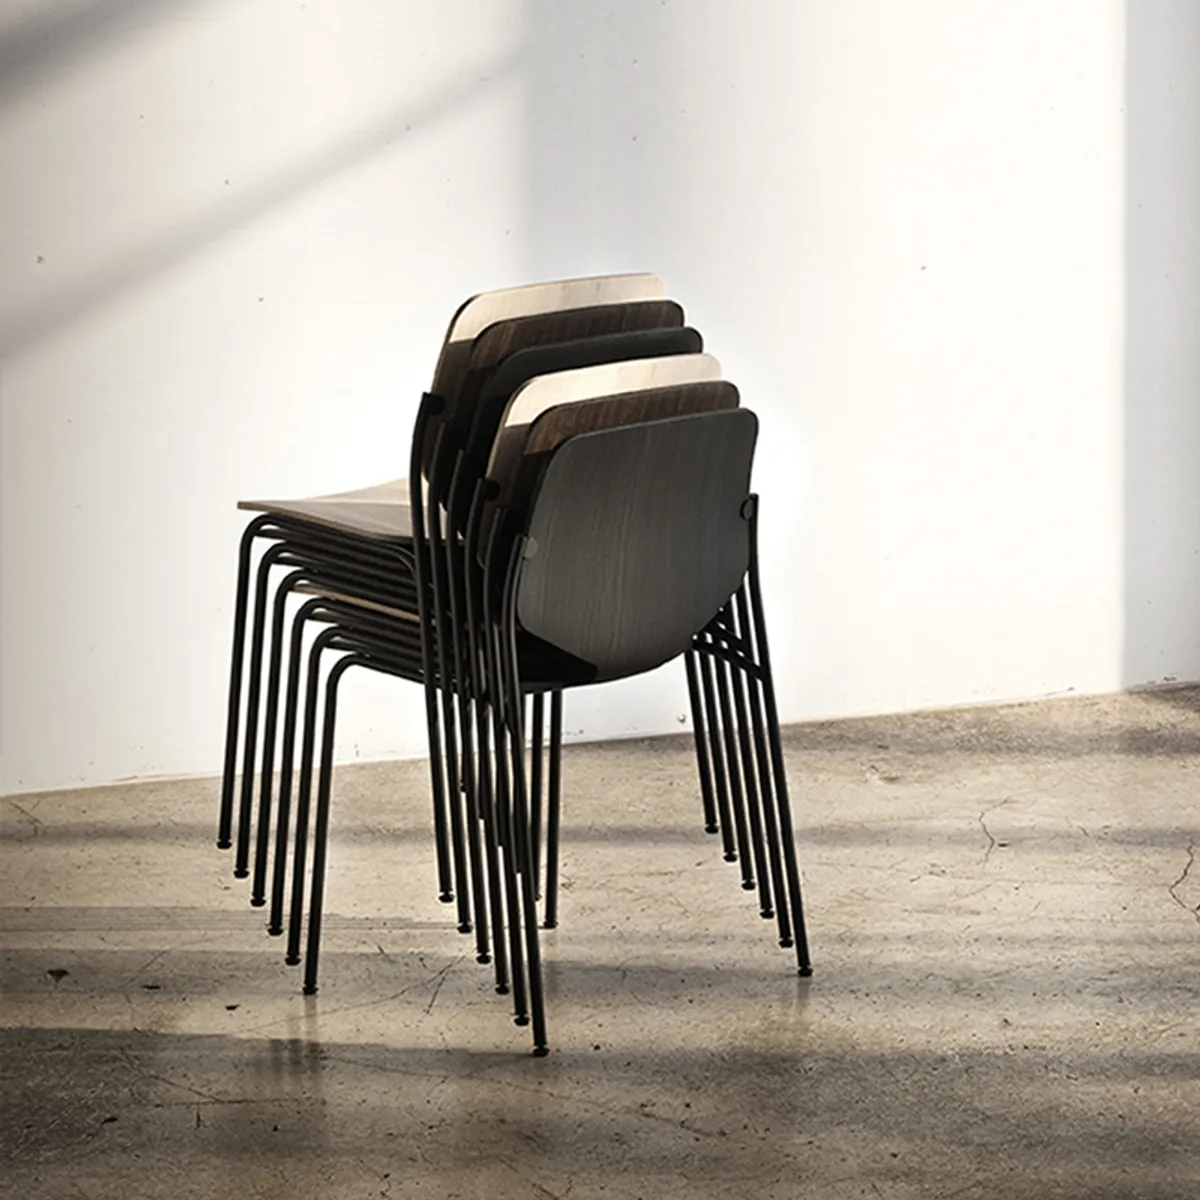 Nova Chair Recycled Furniture Stackable By 6 Inside Out Contracts